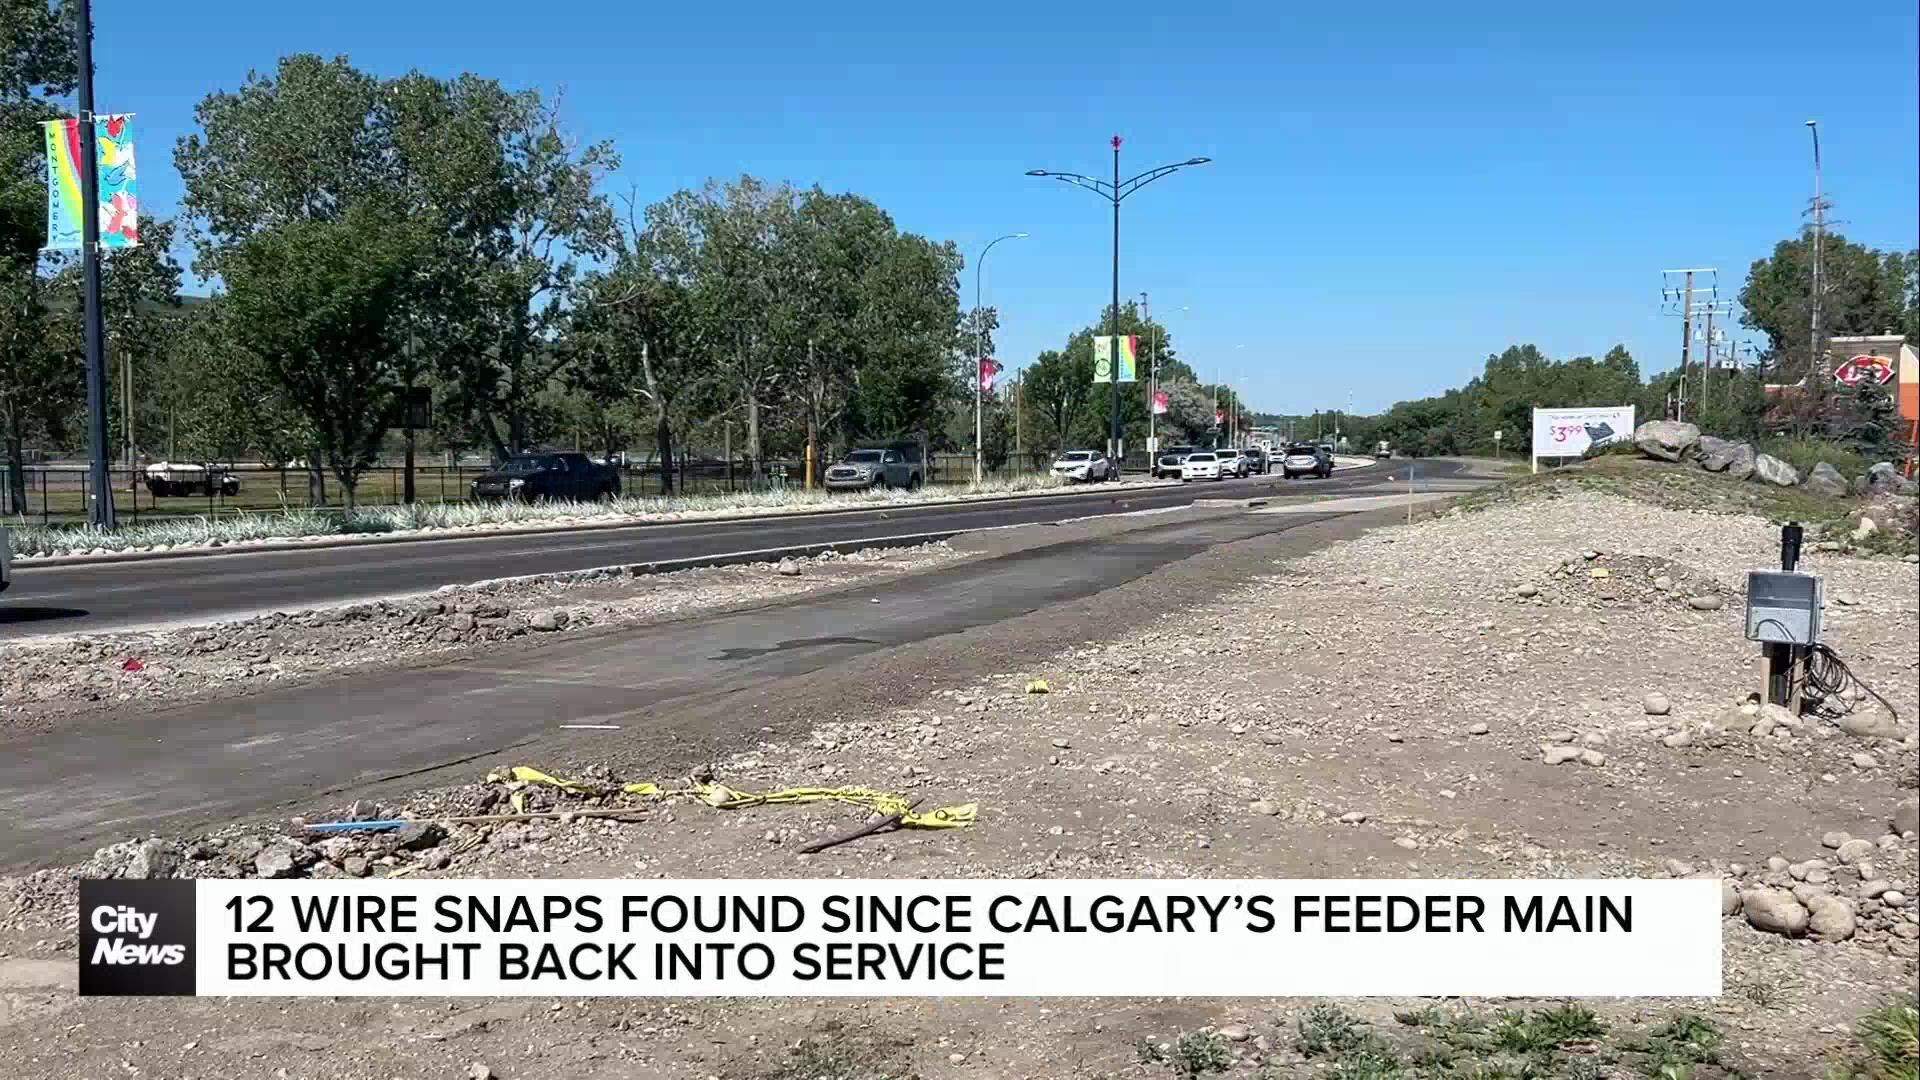 12 wire snaps found since Calgary’s feeder main brought back into service